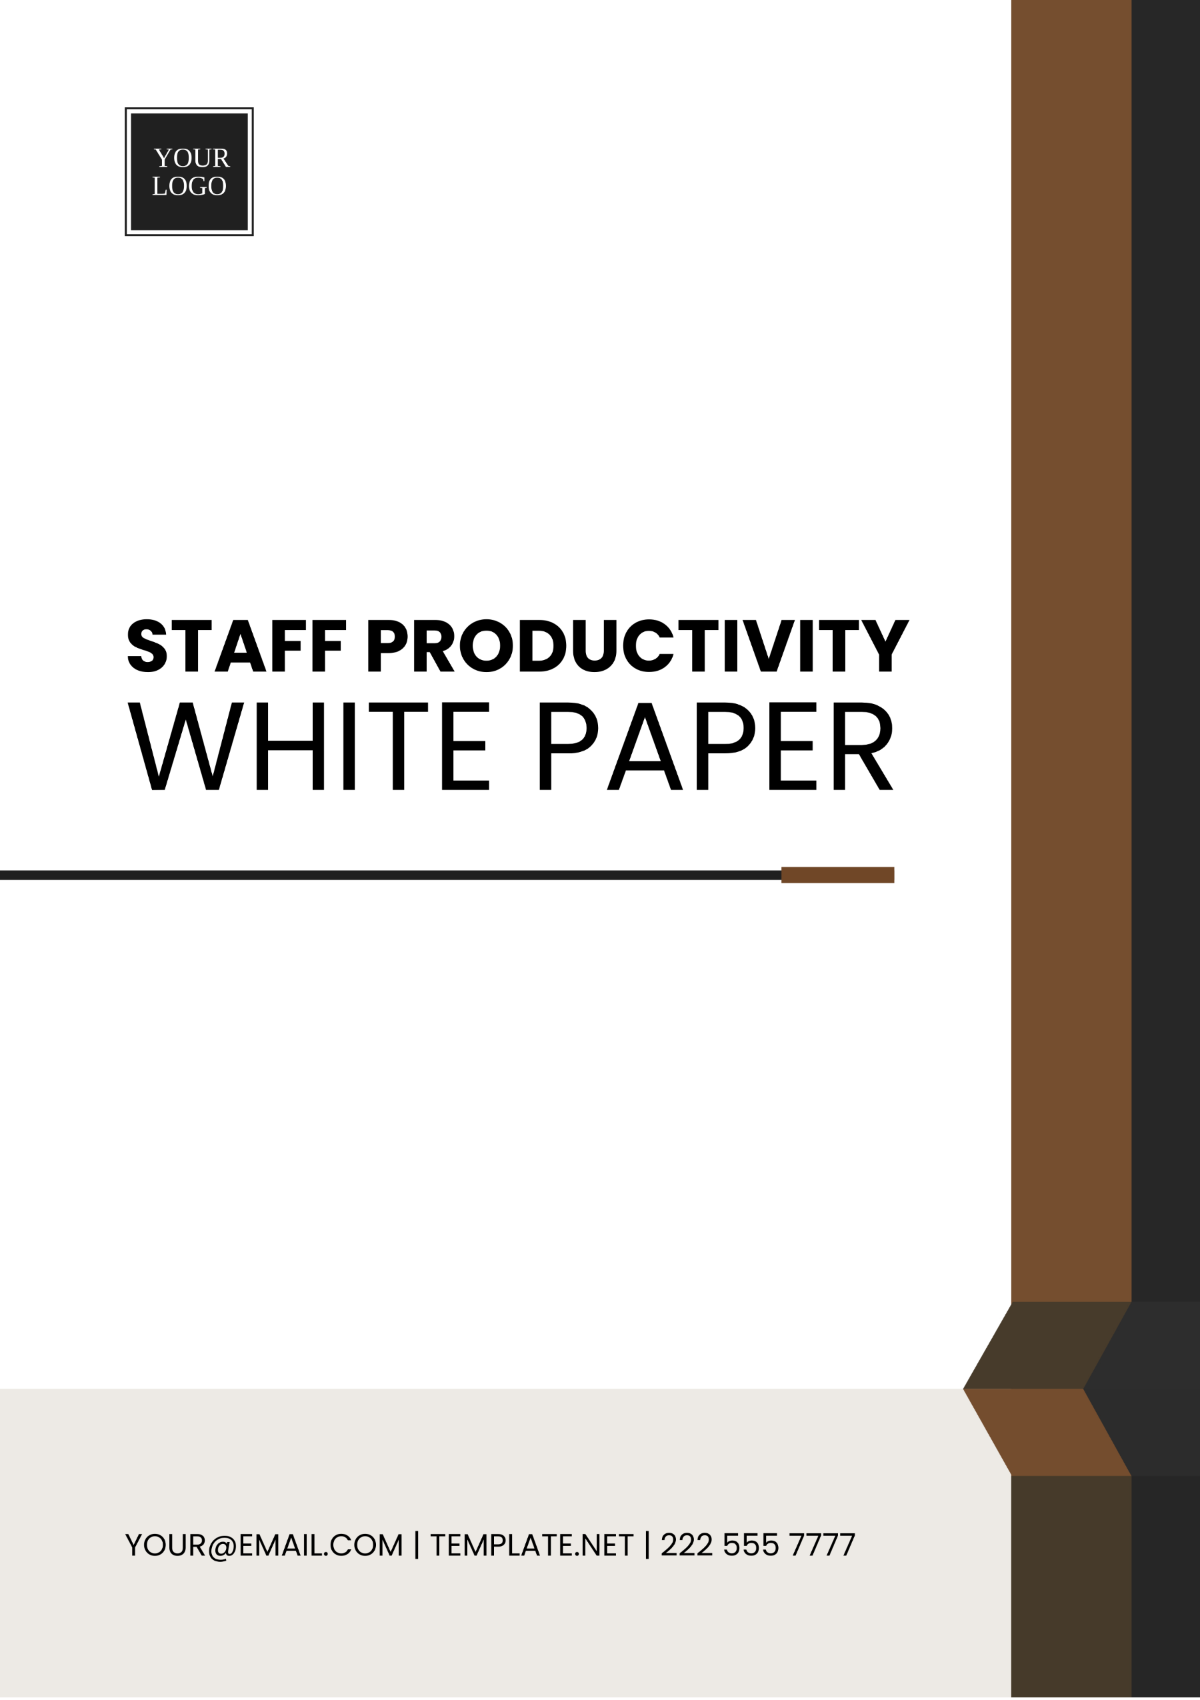 Staff Productivity White Paper Template